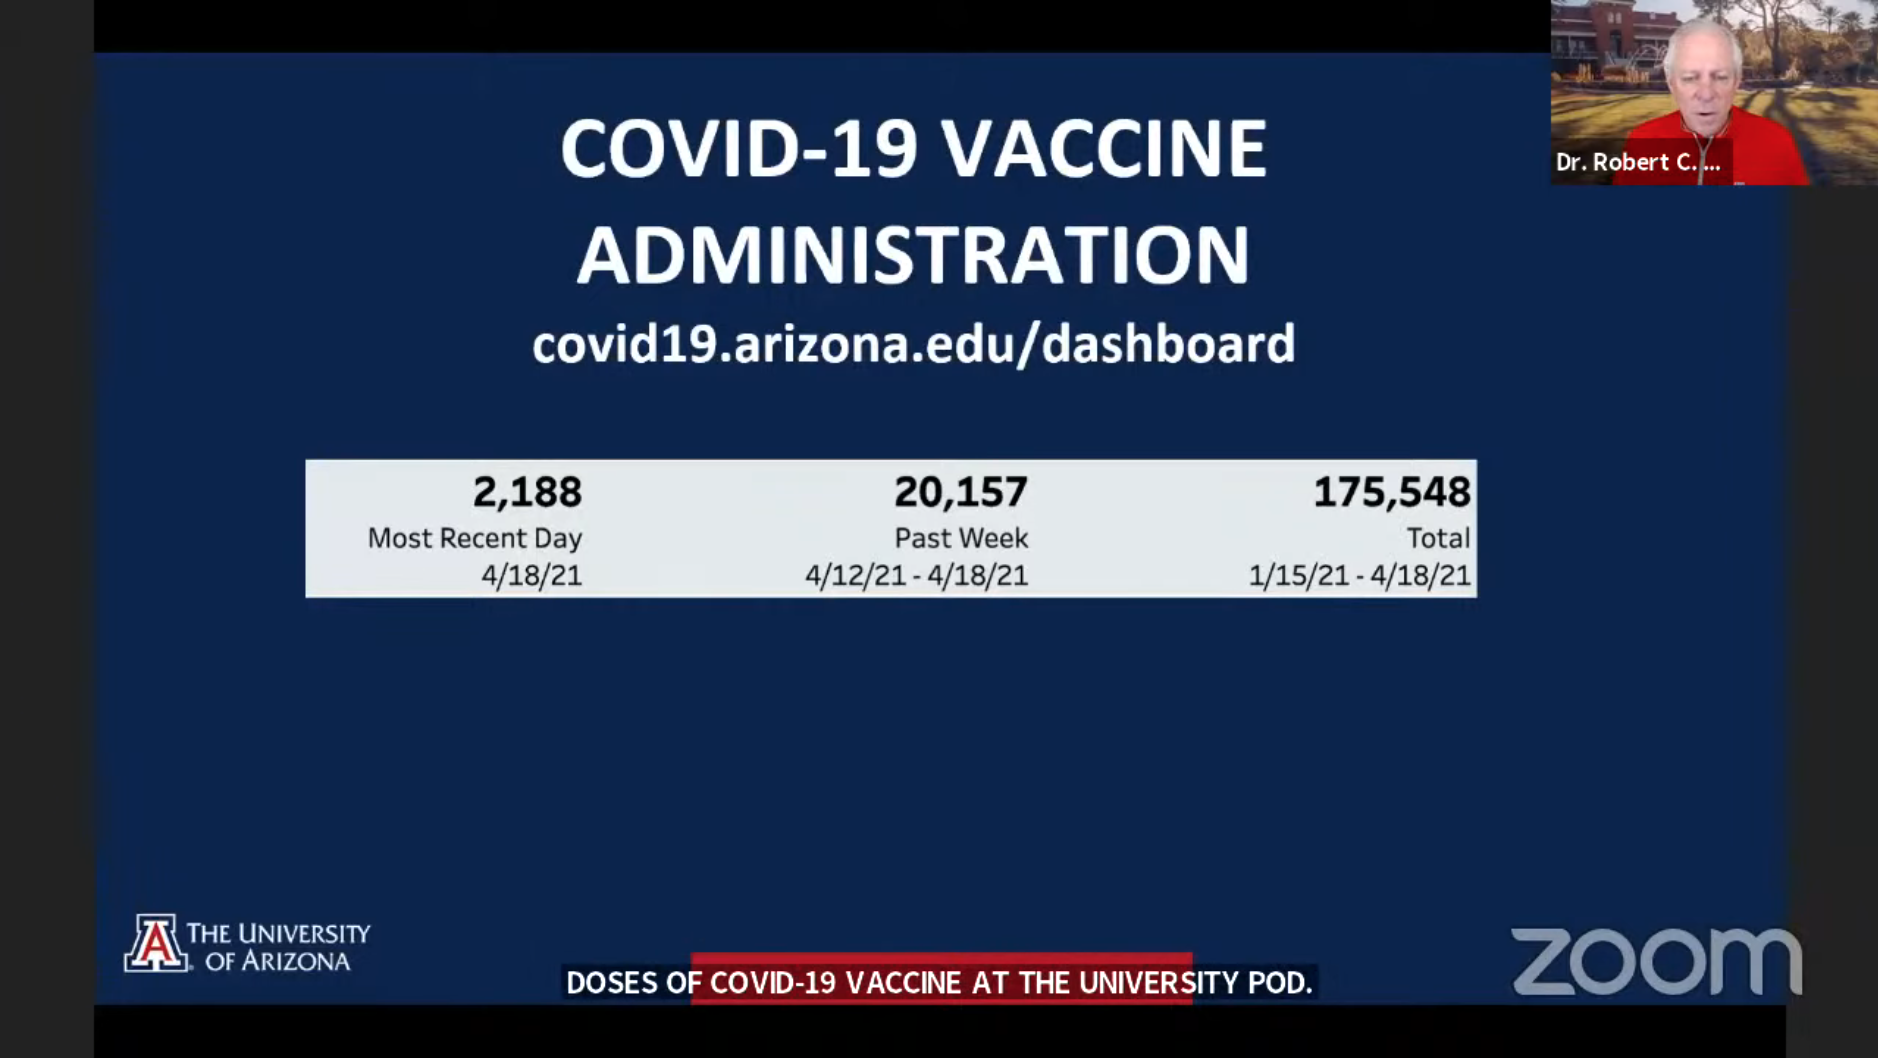 Screenshot of President Dr. Robert C. Robbins, who discussed updated university COVID-19 vaccine administration data; in the last week, over 20,000 shots were distributed at the Point of Distribution.